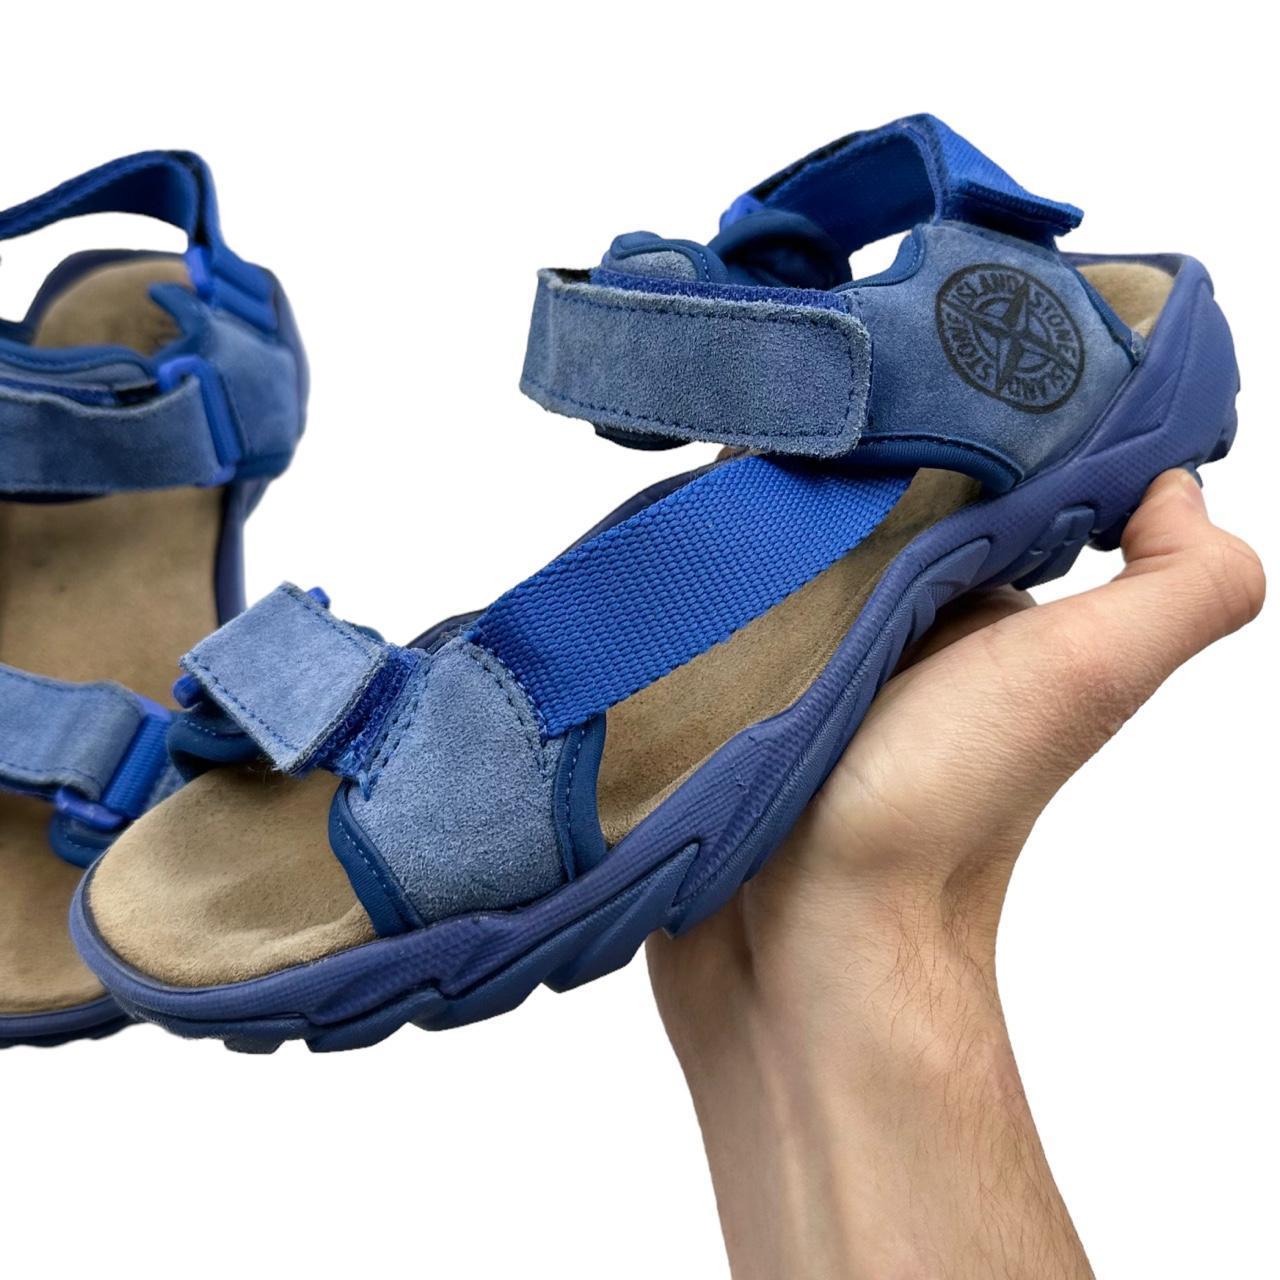 Vintage Stone Island Sandals Size UK 7 - Known Source